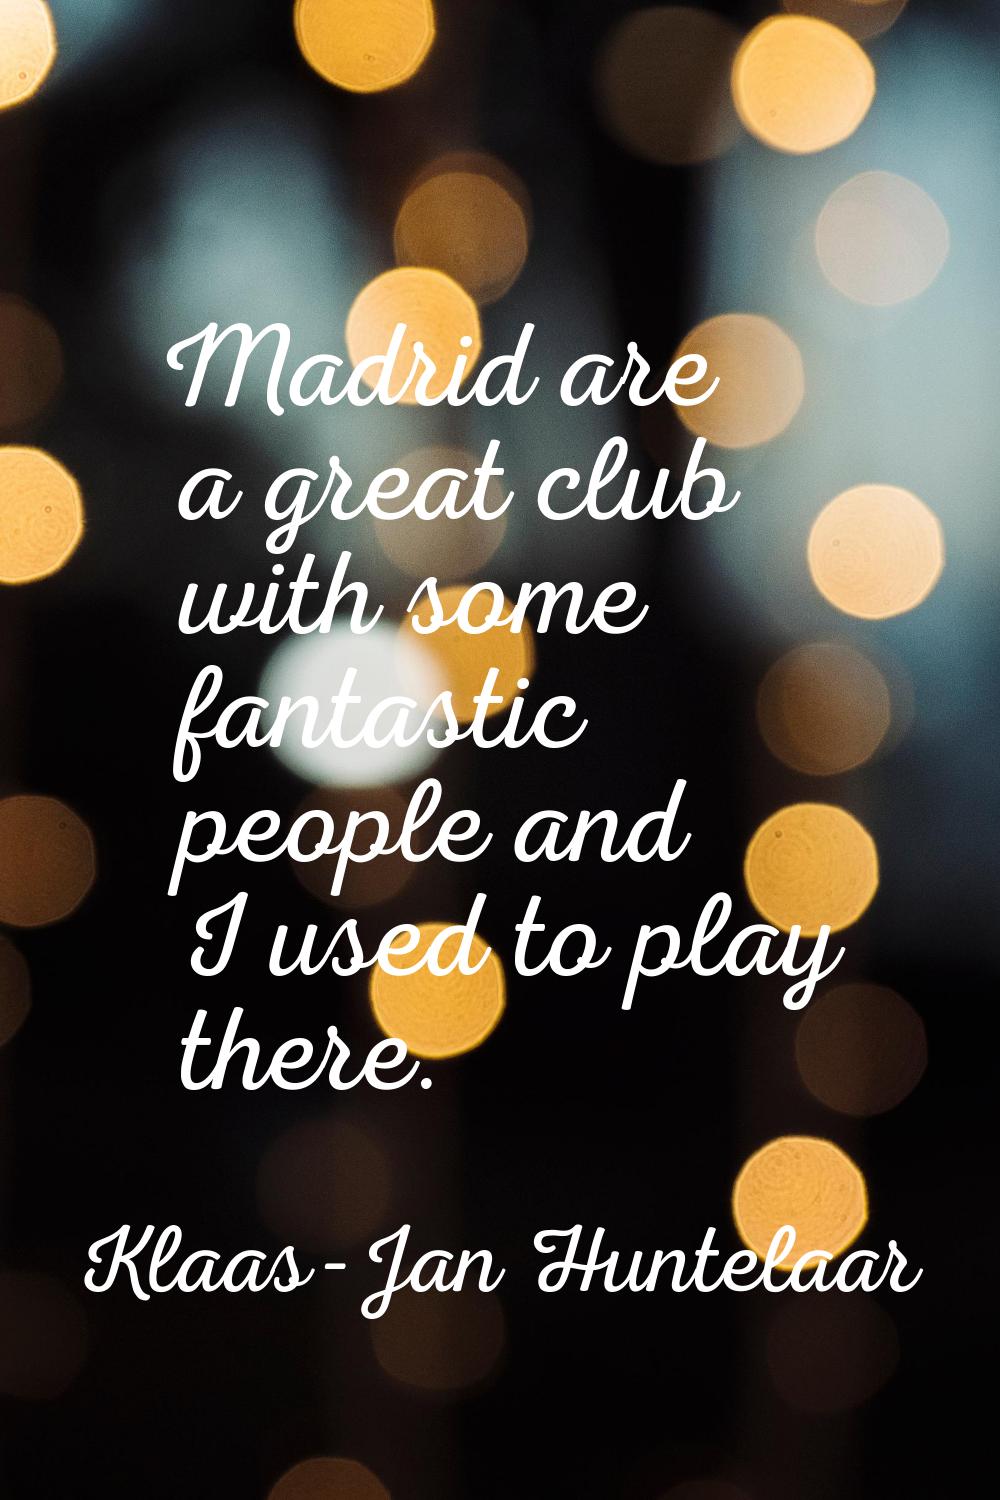 Madrid are a great club with some fantastic people and I used to play there.